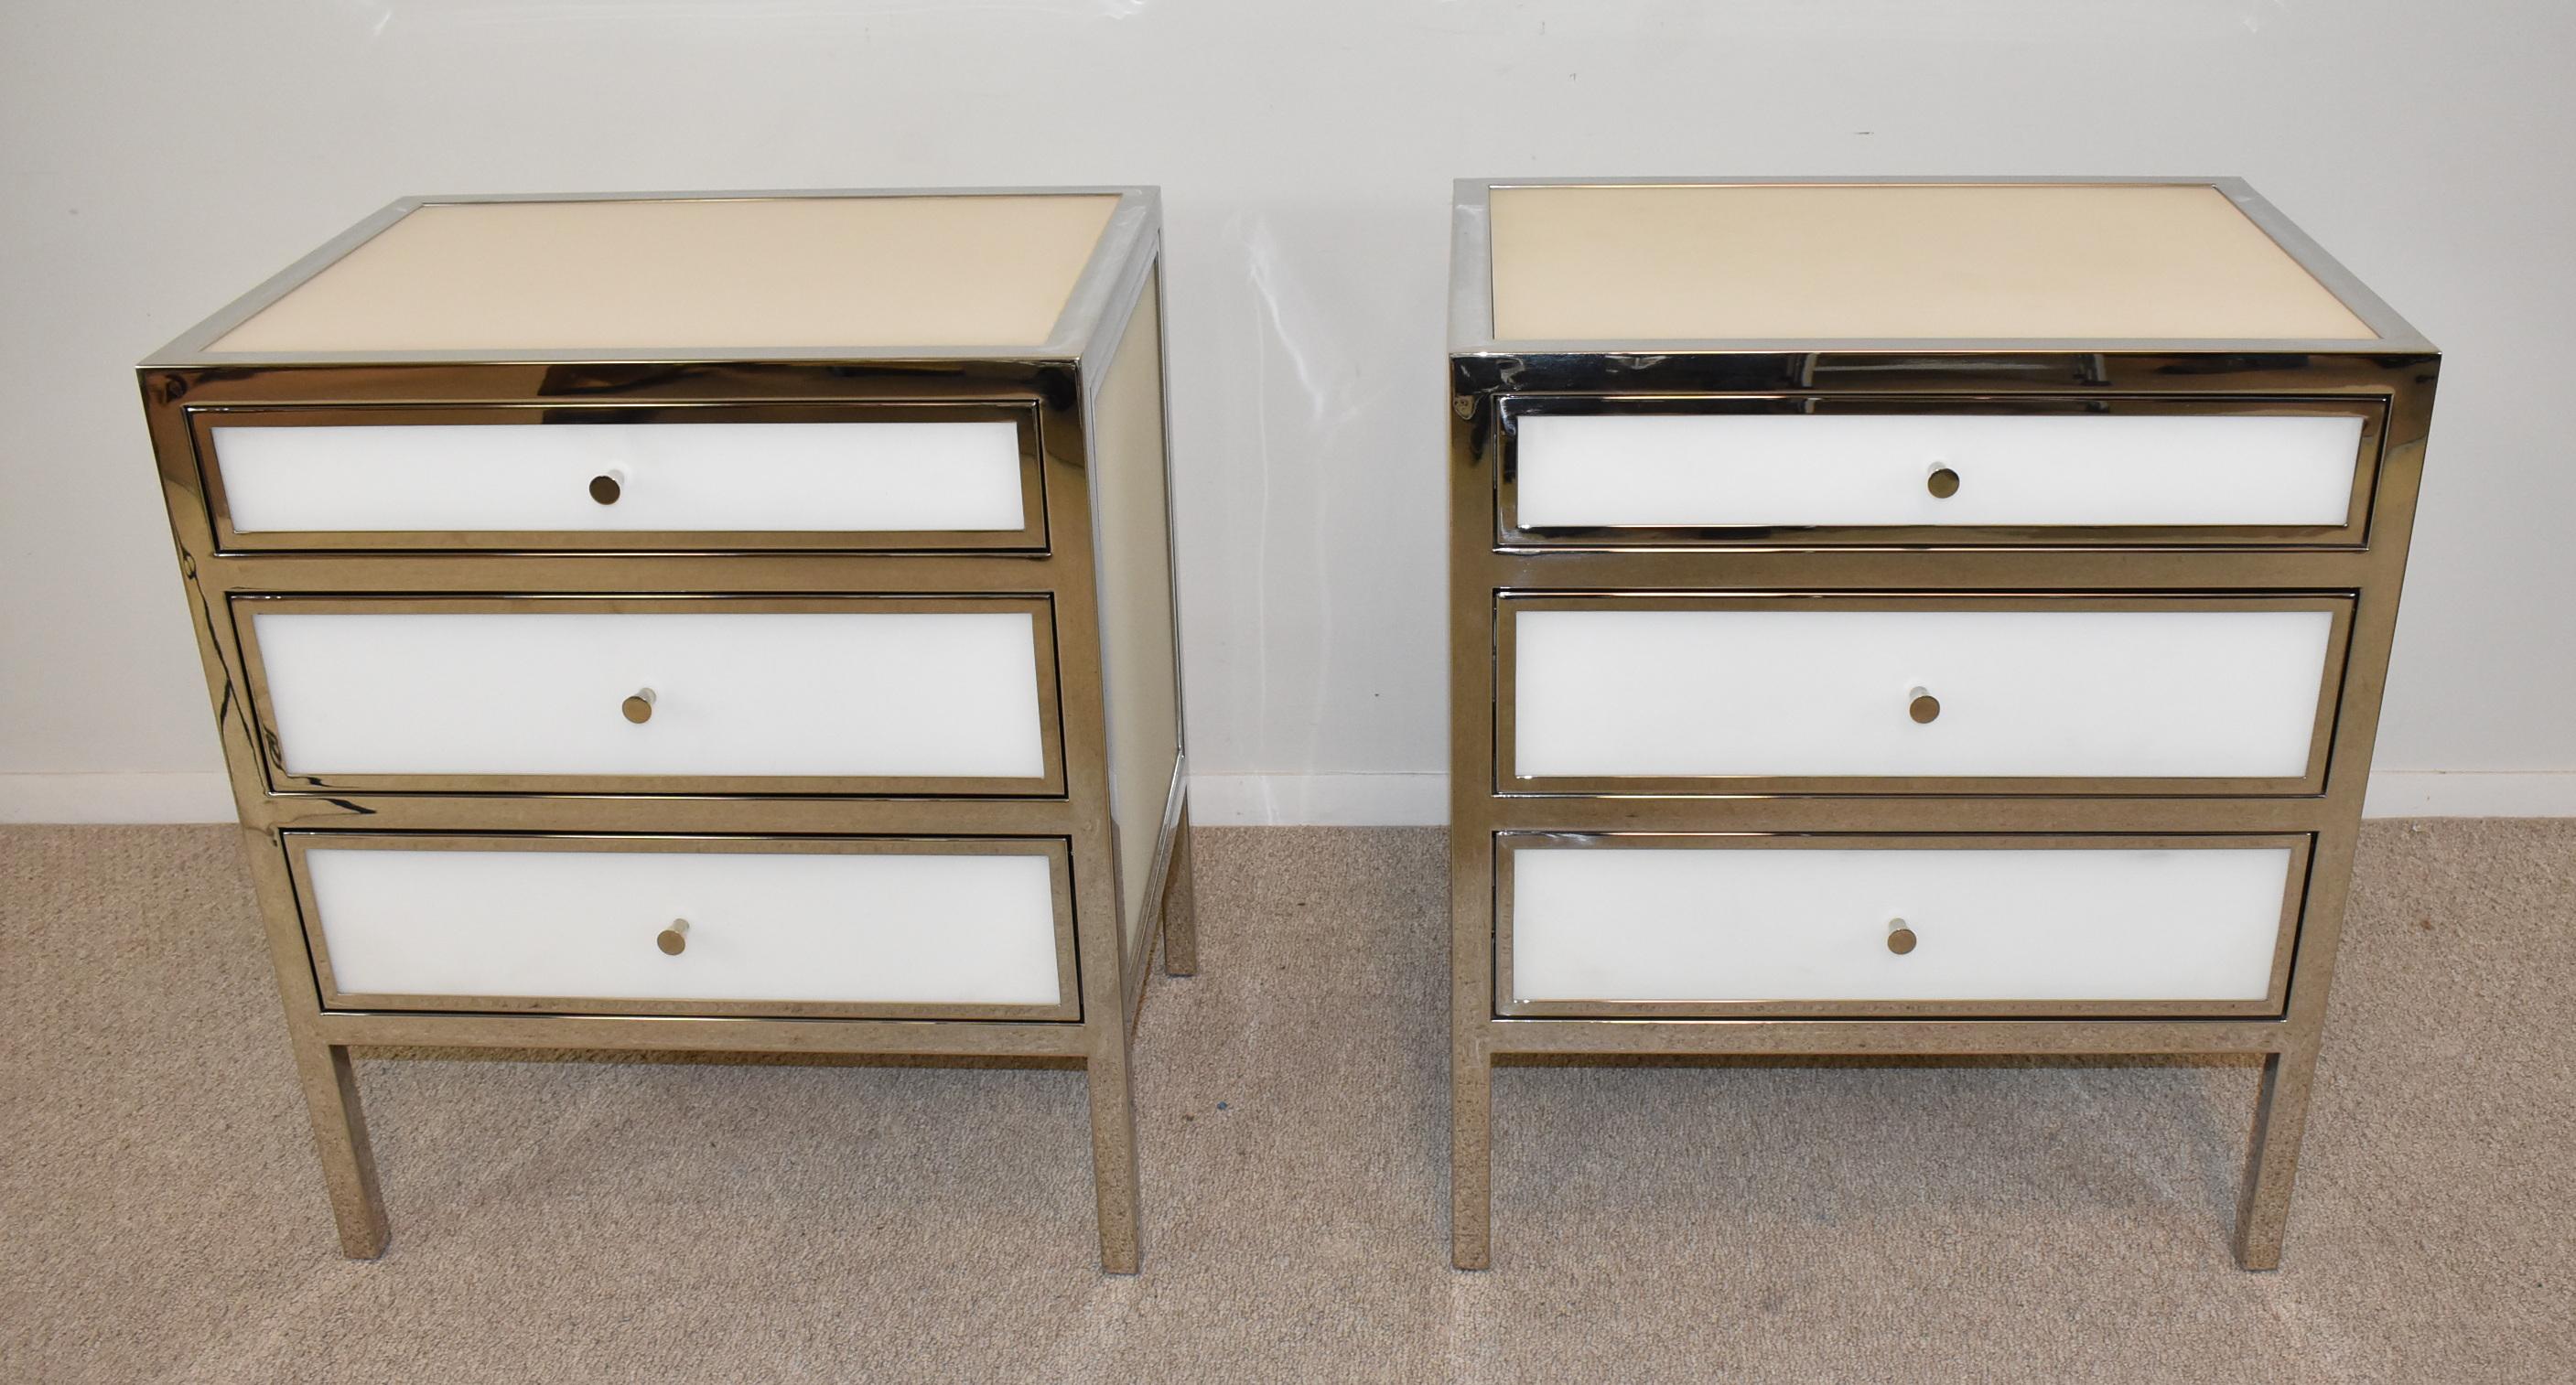 Pair modern chrome and Blanca glass three drawer chests / nightstands by Bernhardt.